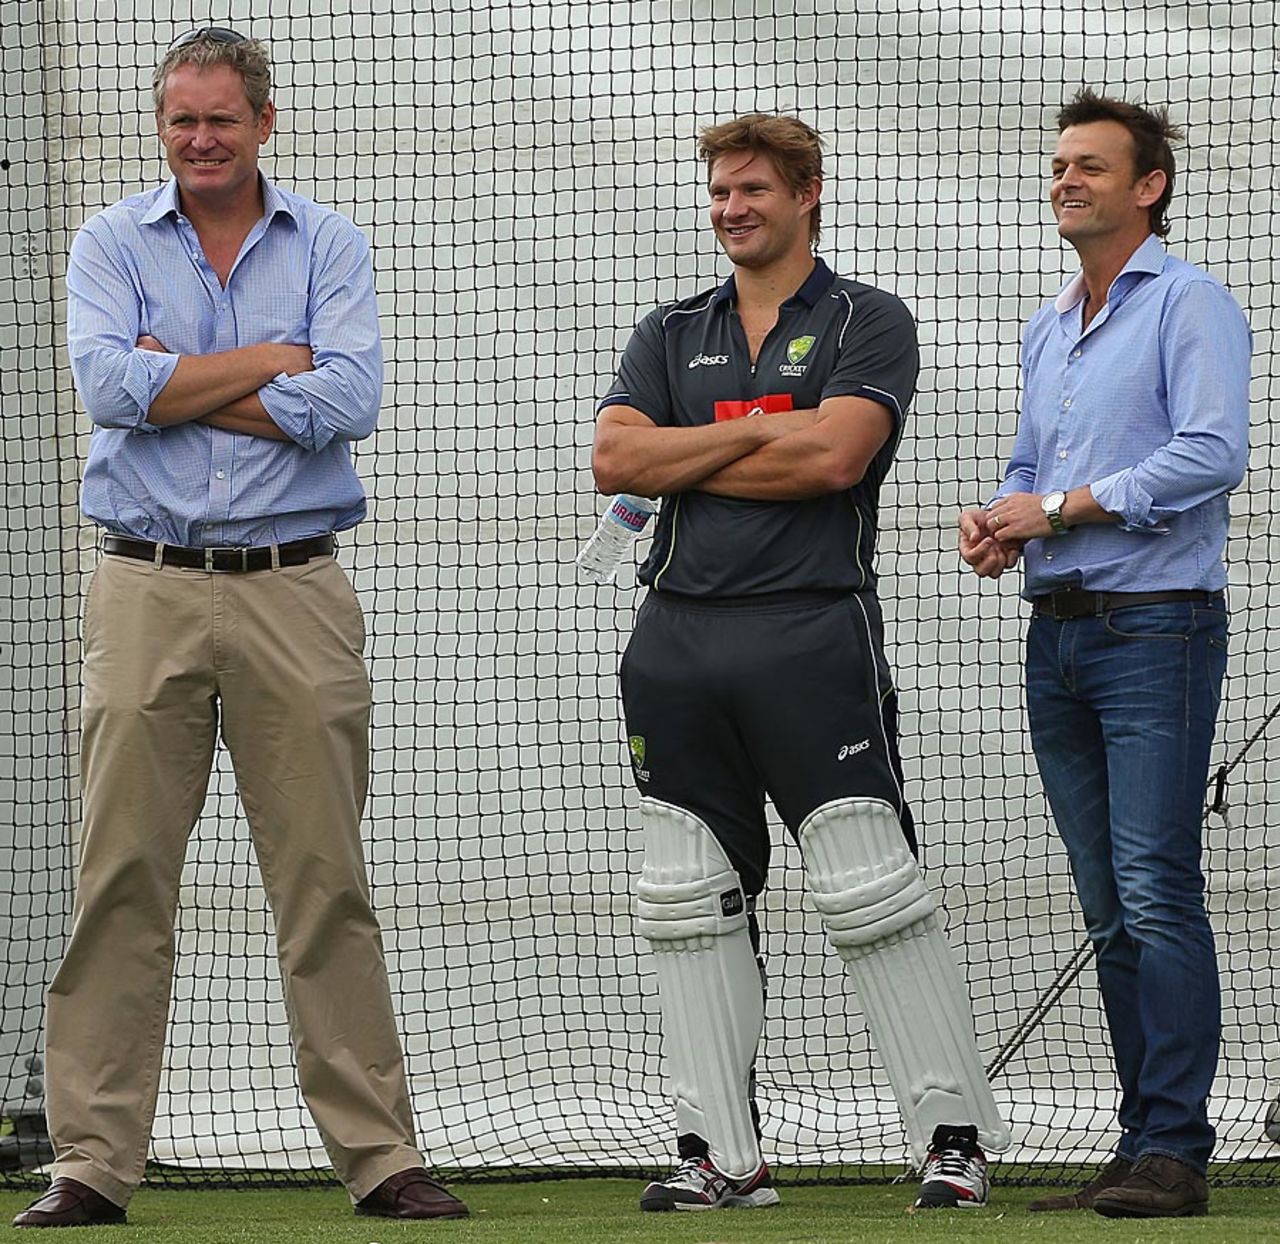 Tom Moody, Shane Watson and Adam Gilchrist at a training session, Perth, November 28, 2012